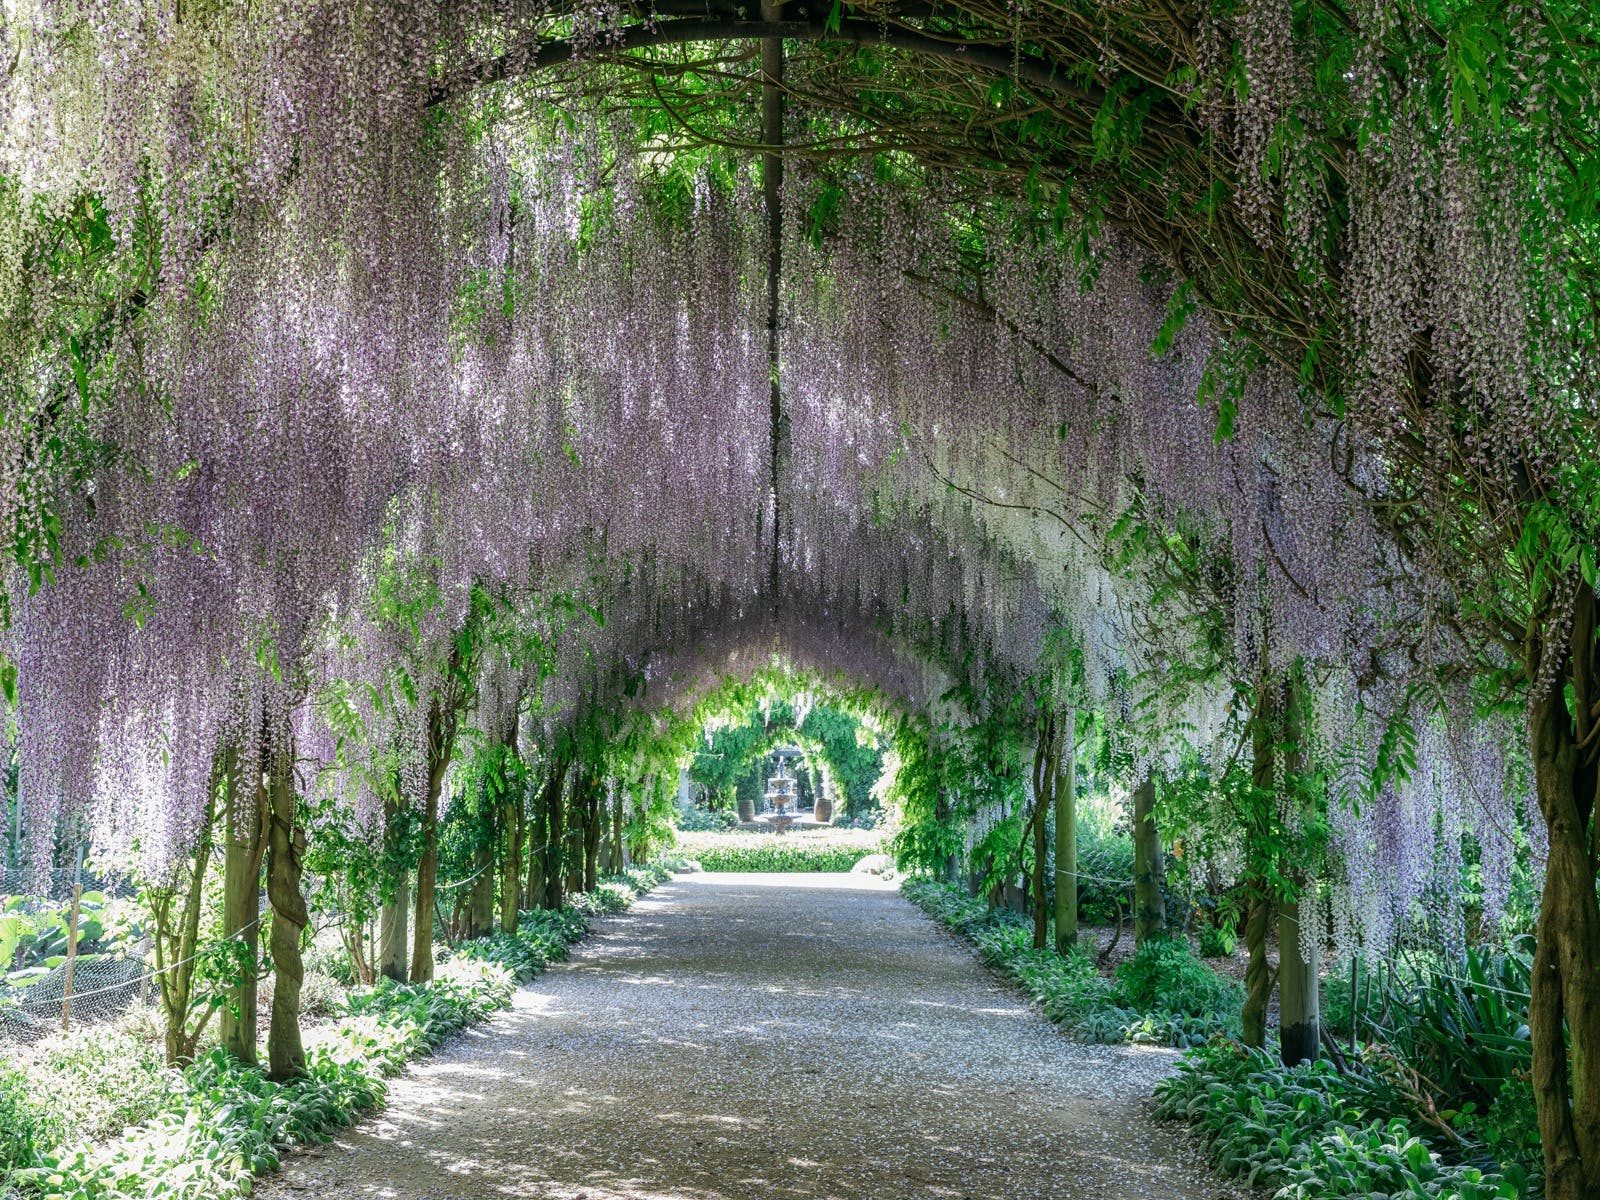 A wisteria arbour with long purple flowers in bloom.